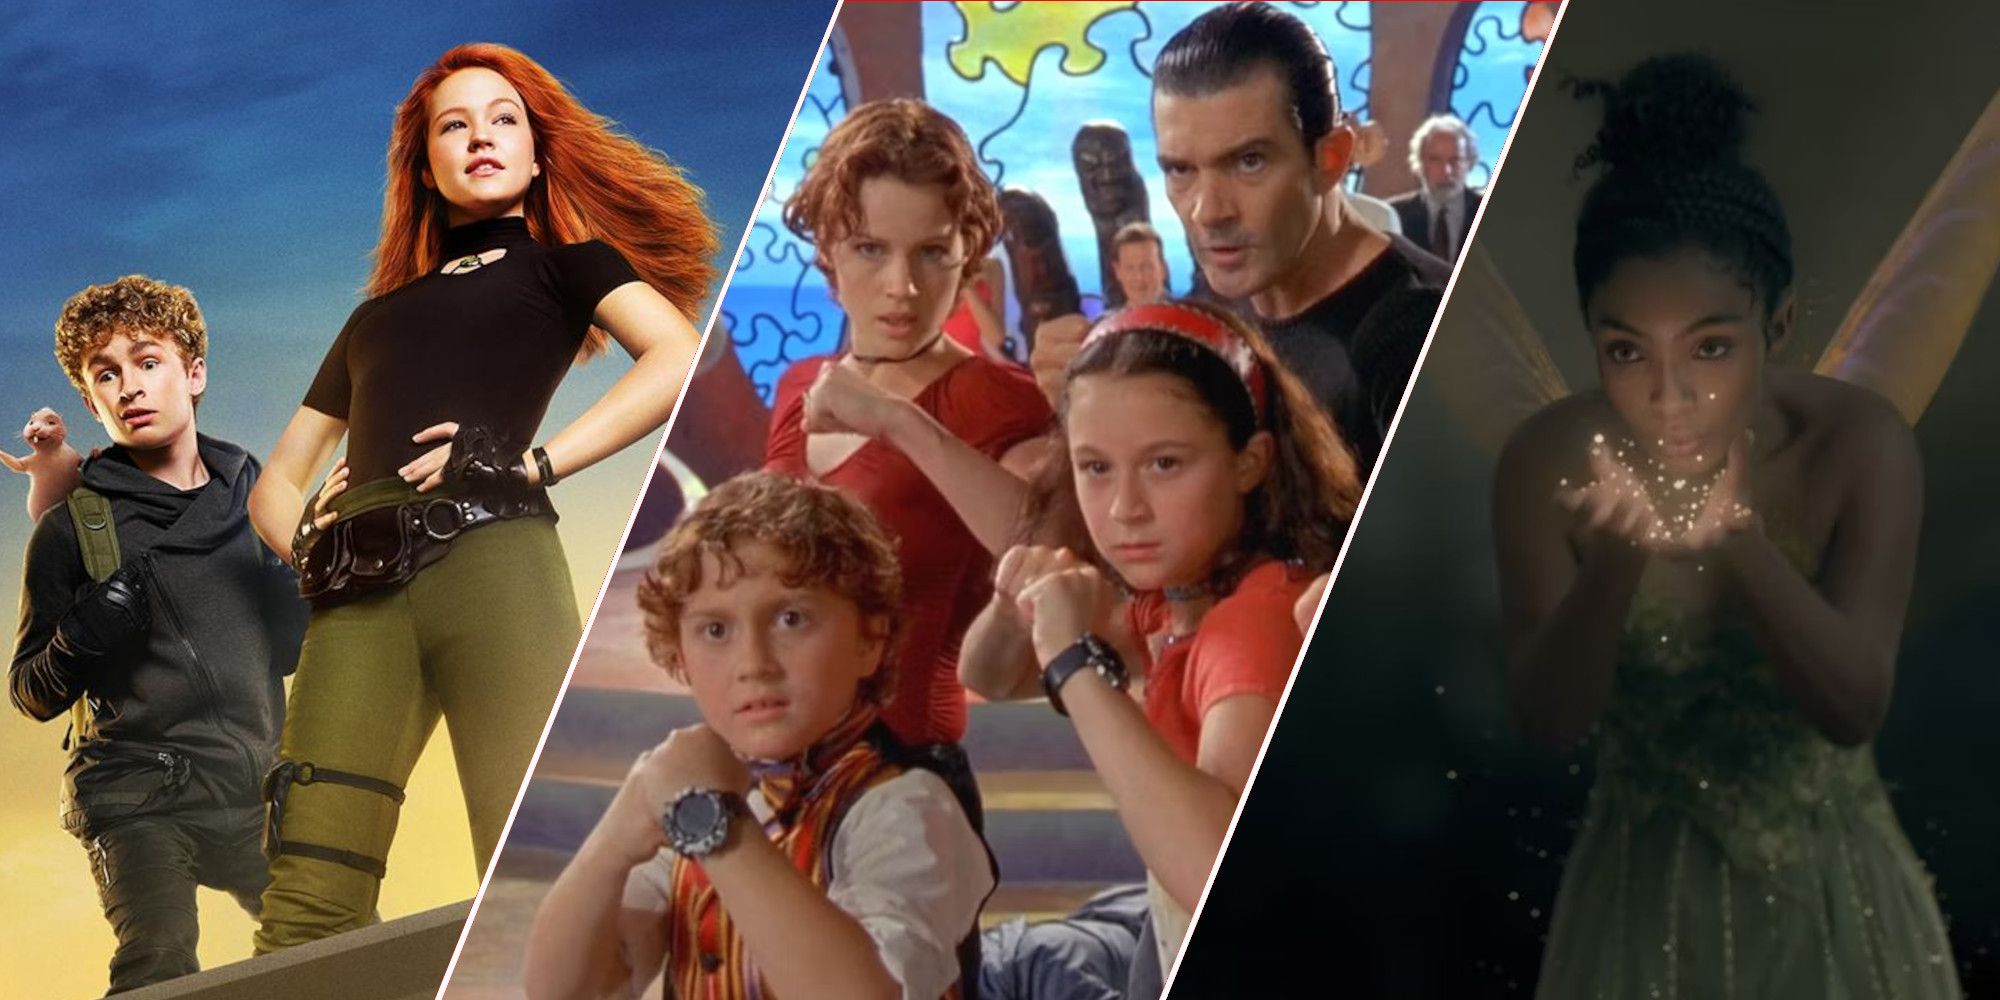 A collage of family movies that critics loved, but audiences hated according to Rotten Tomatoes, featuring stills from Kim Possible (2019), Spy Kids, and Peter Pan & Wendy